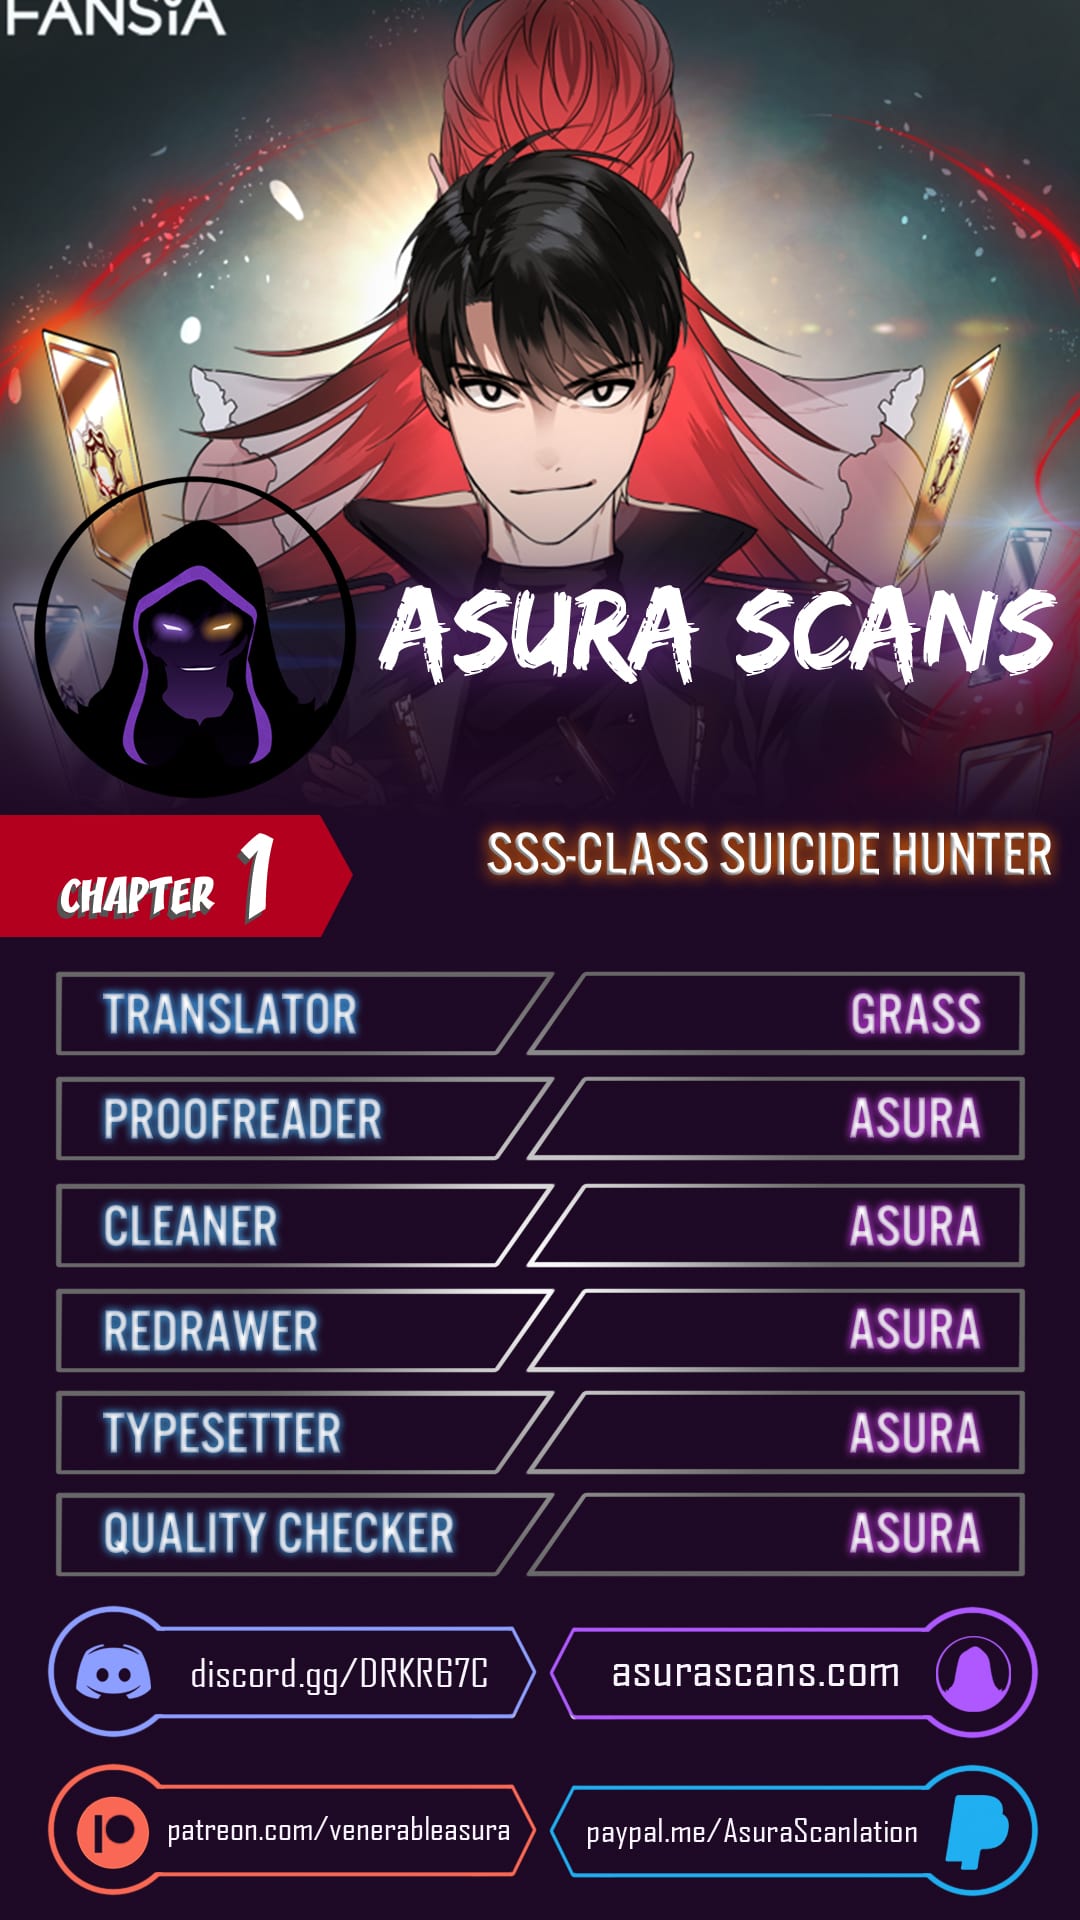 SSS-Class Suicide Hunter chapter 1